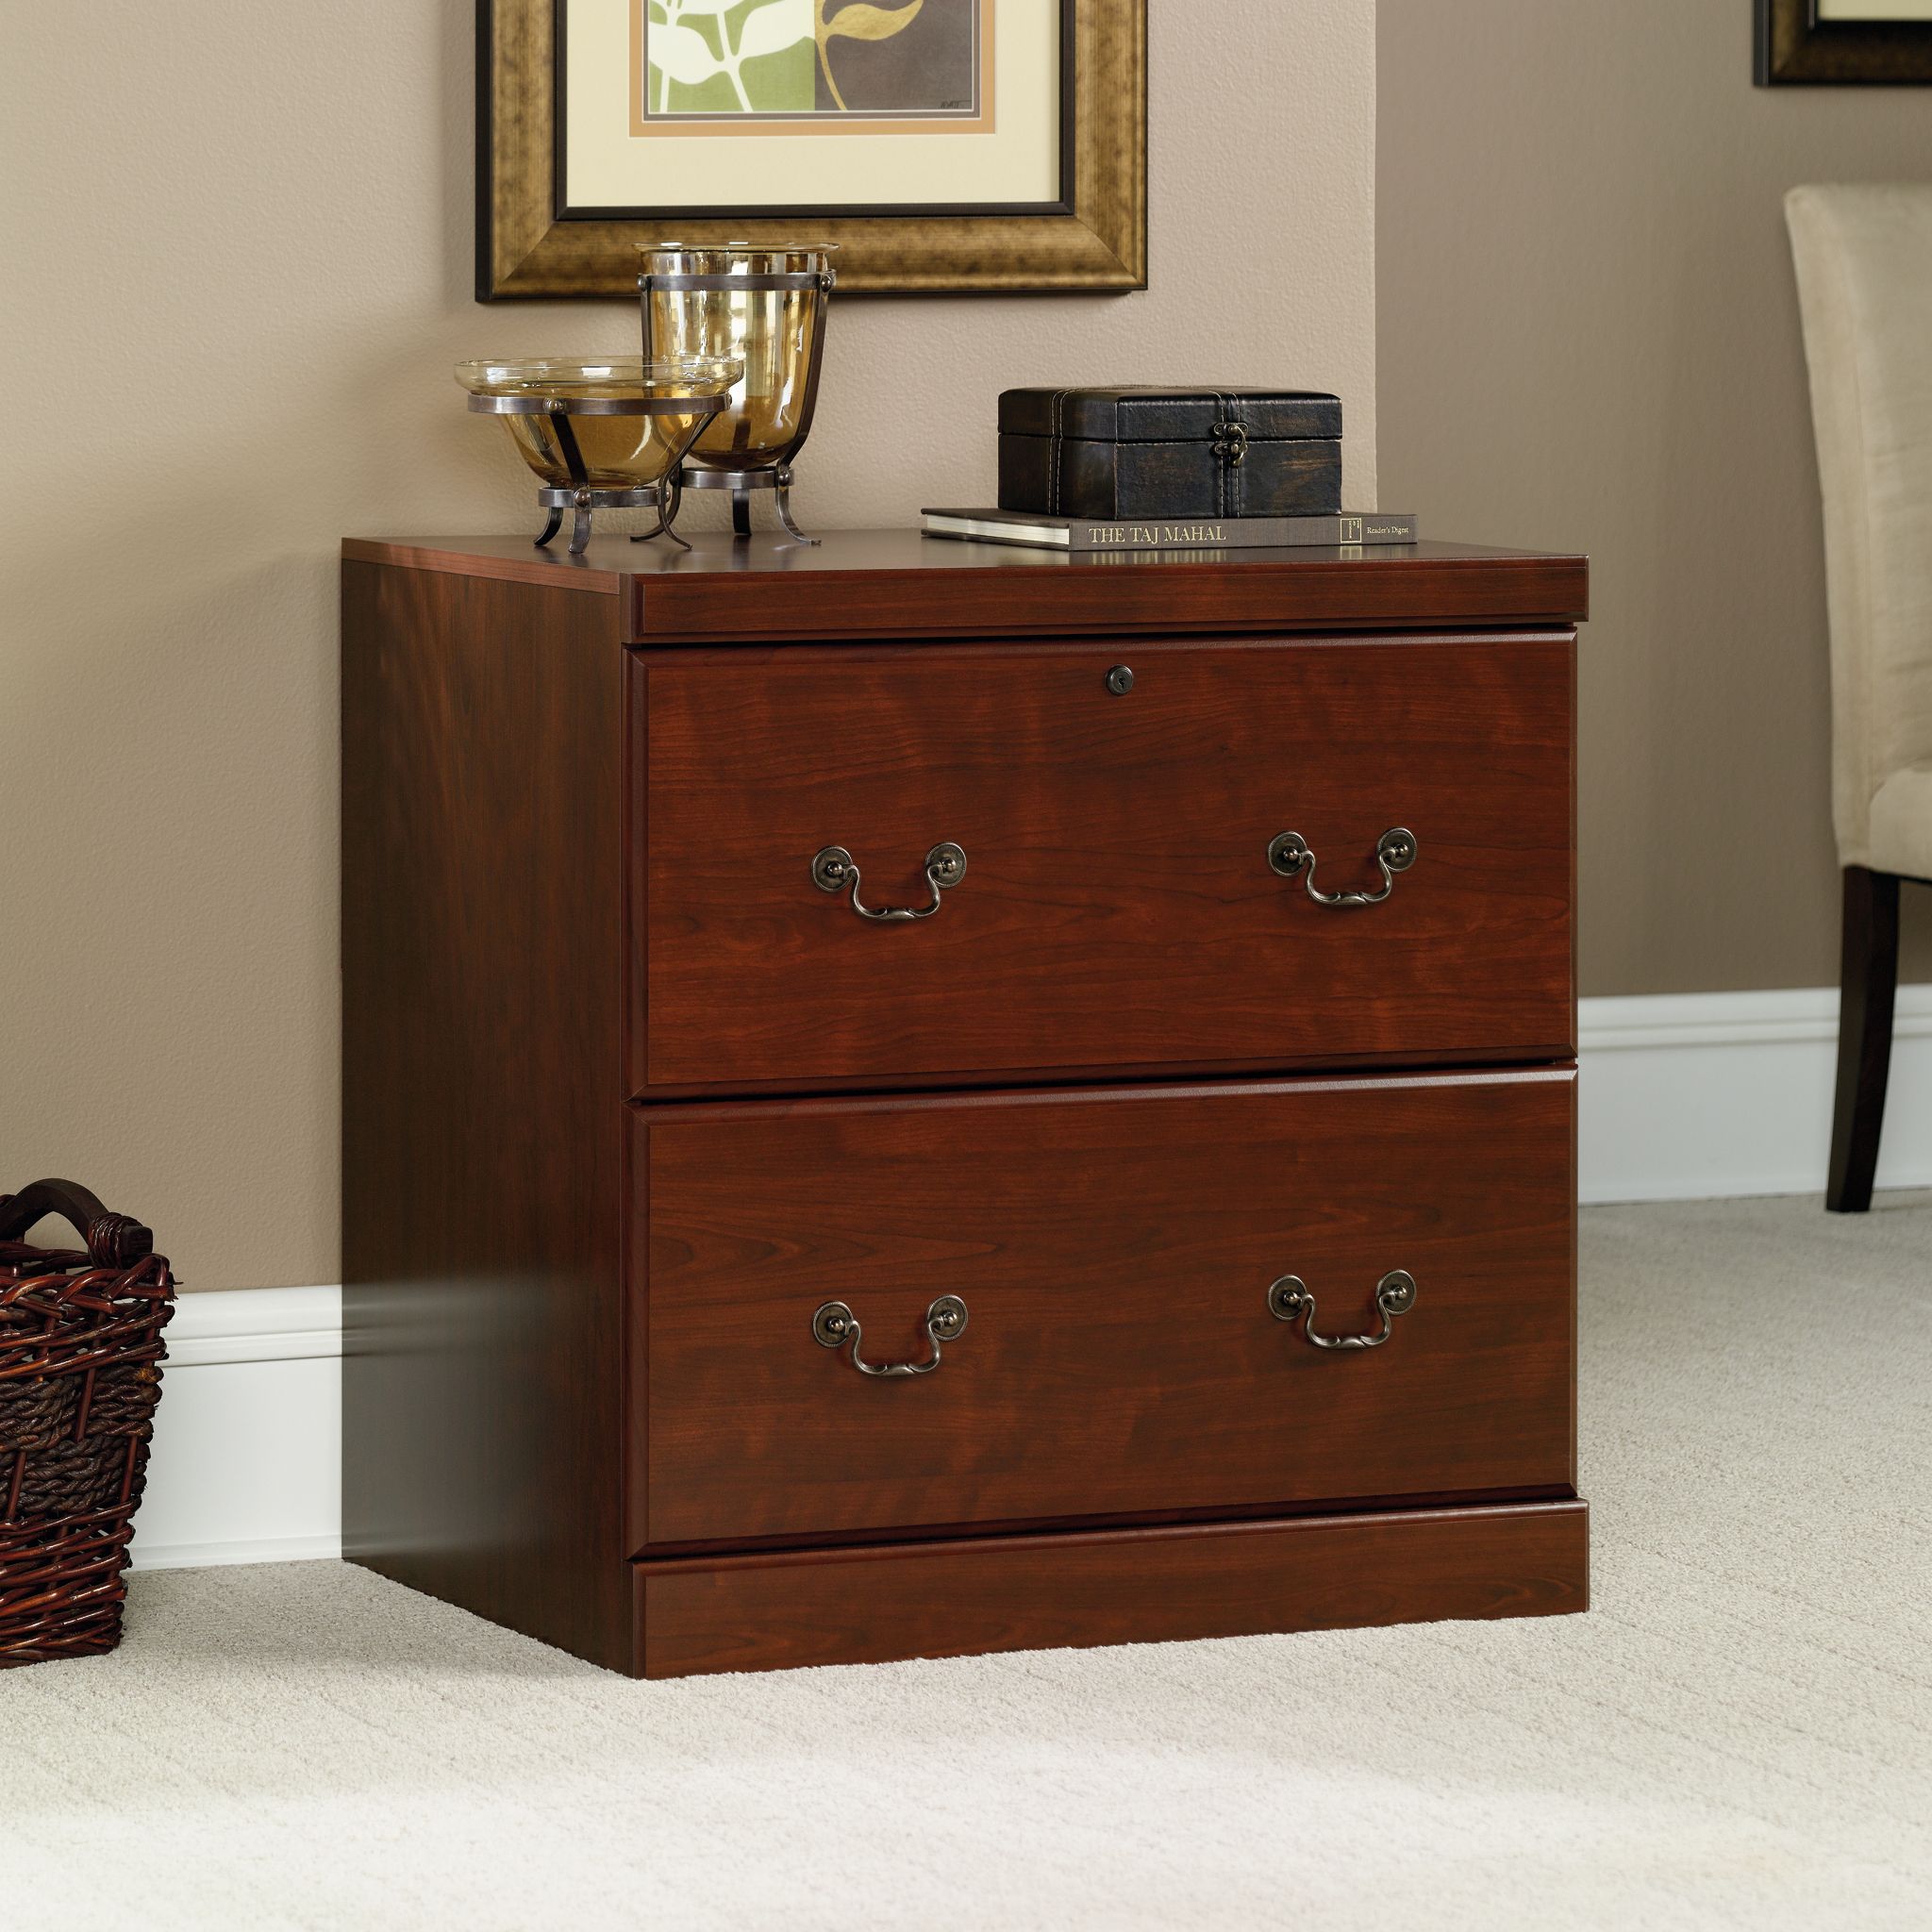 Sauder Heritage Hill Lateral File Cabinet, Classic Cherry Finish - image 1 of 5